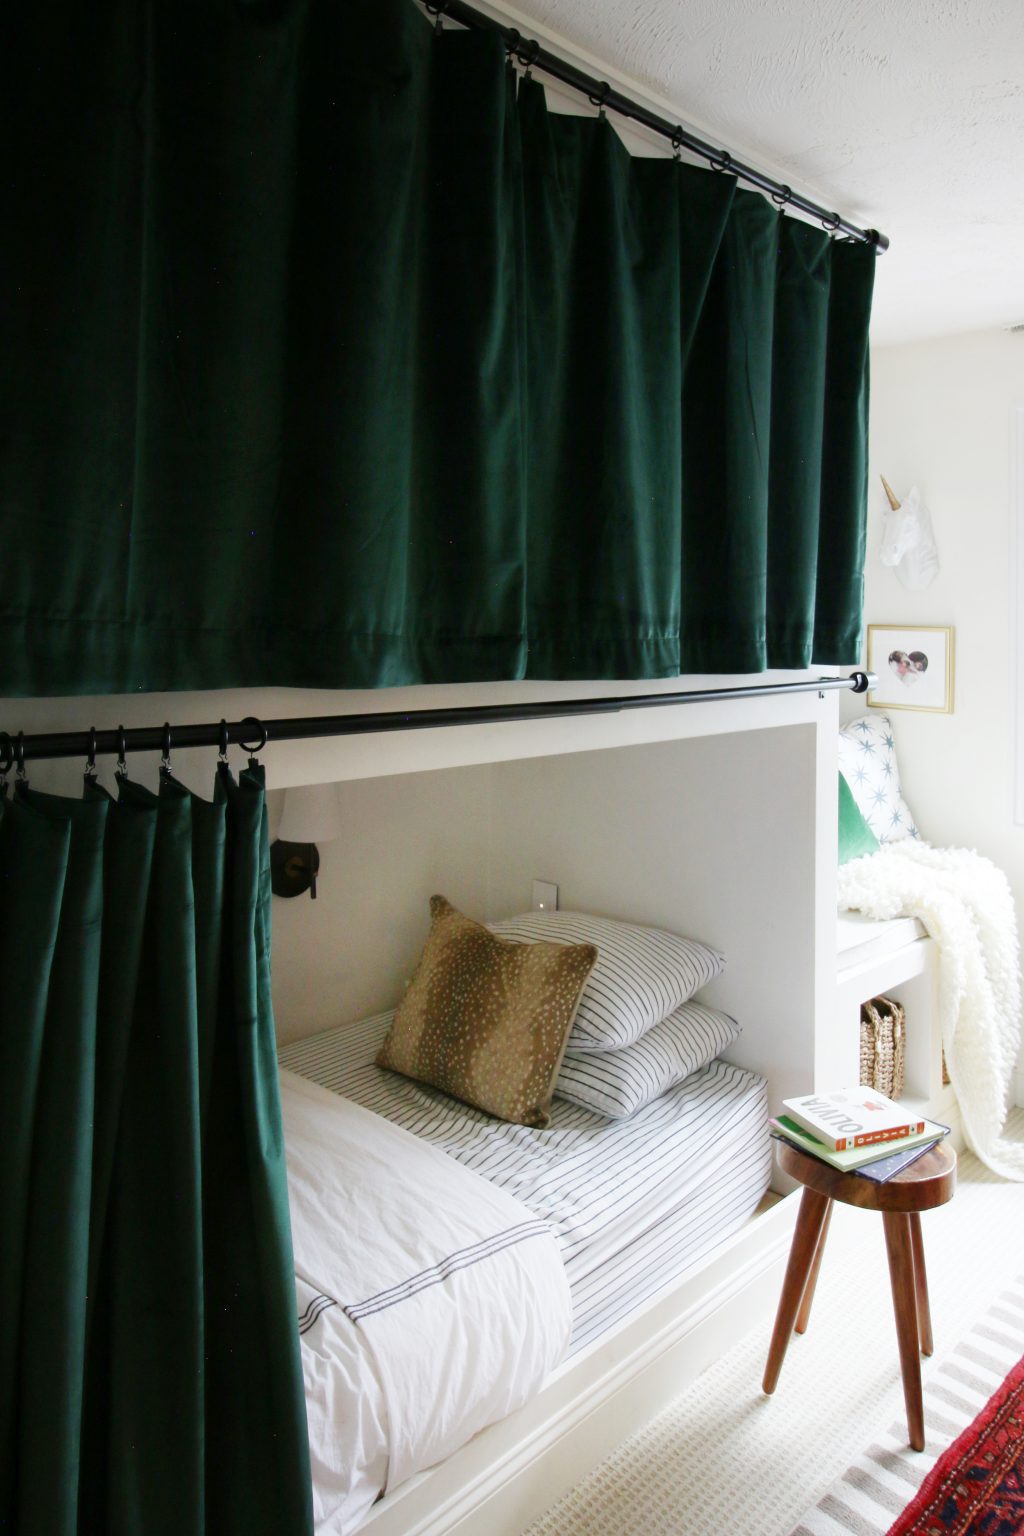 Hanging Curtains On Bunk Beds Chris, Bed Curtains For Bunk Beds